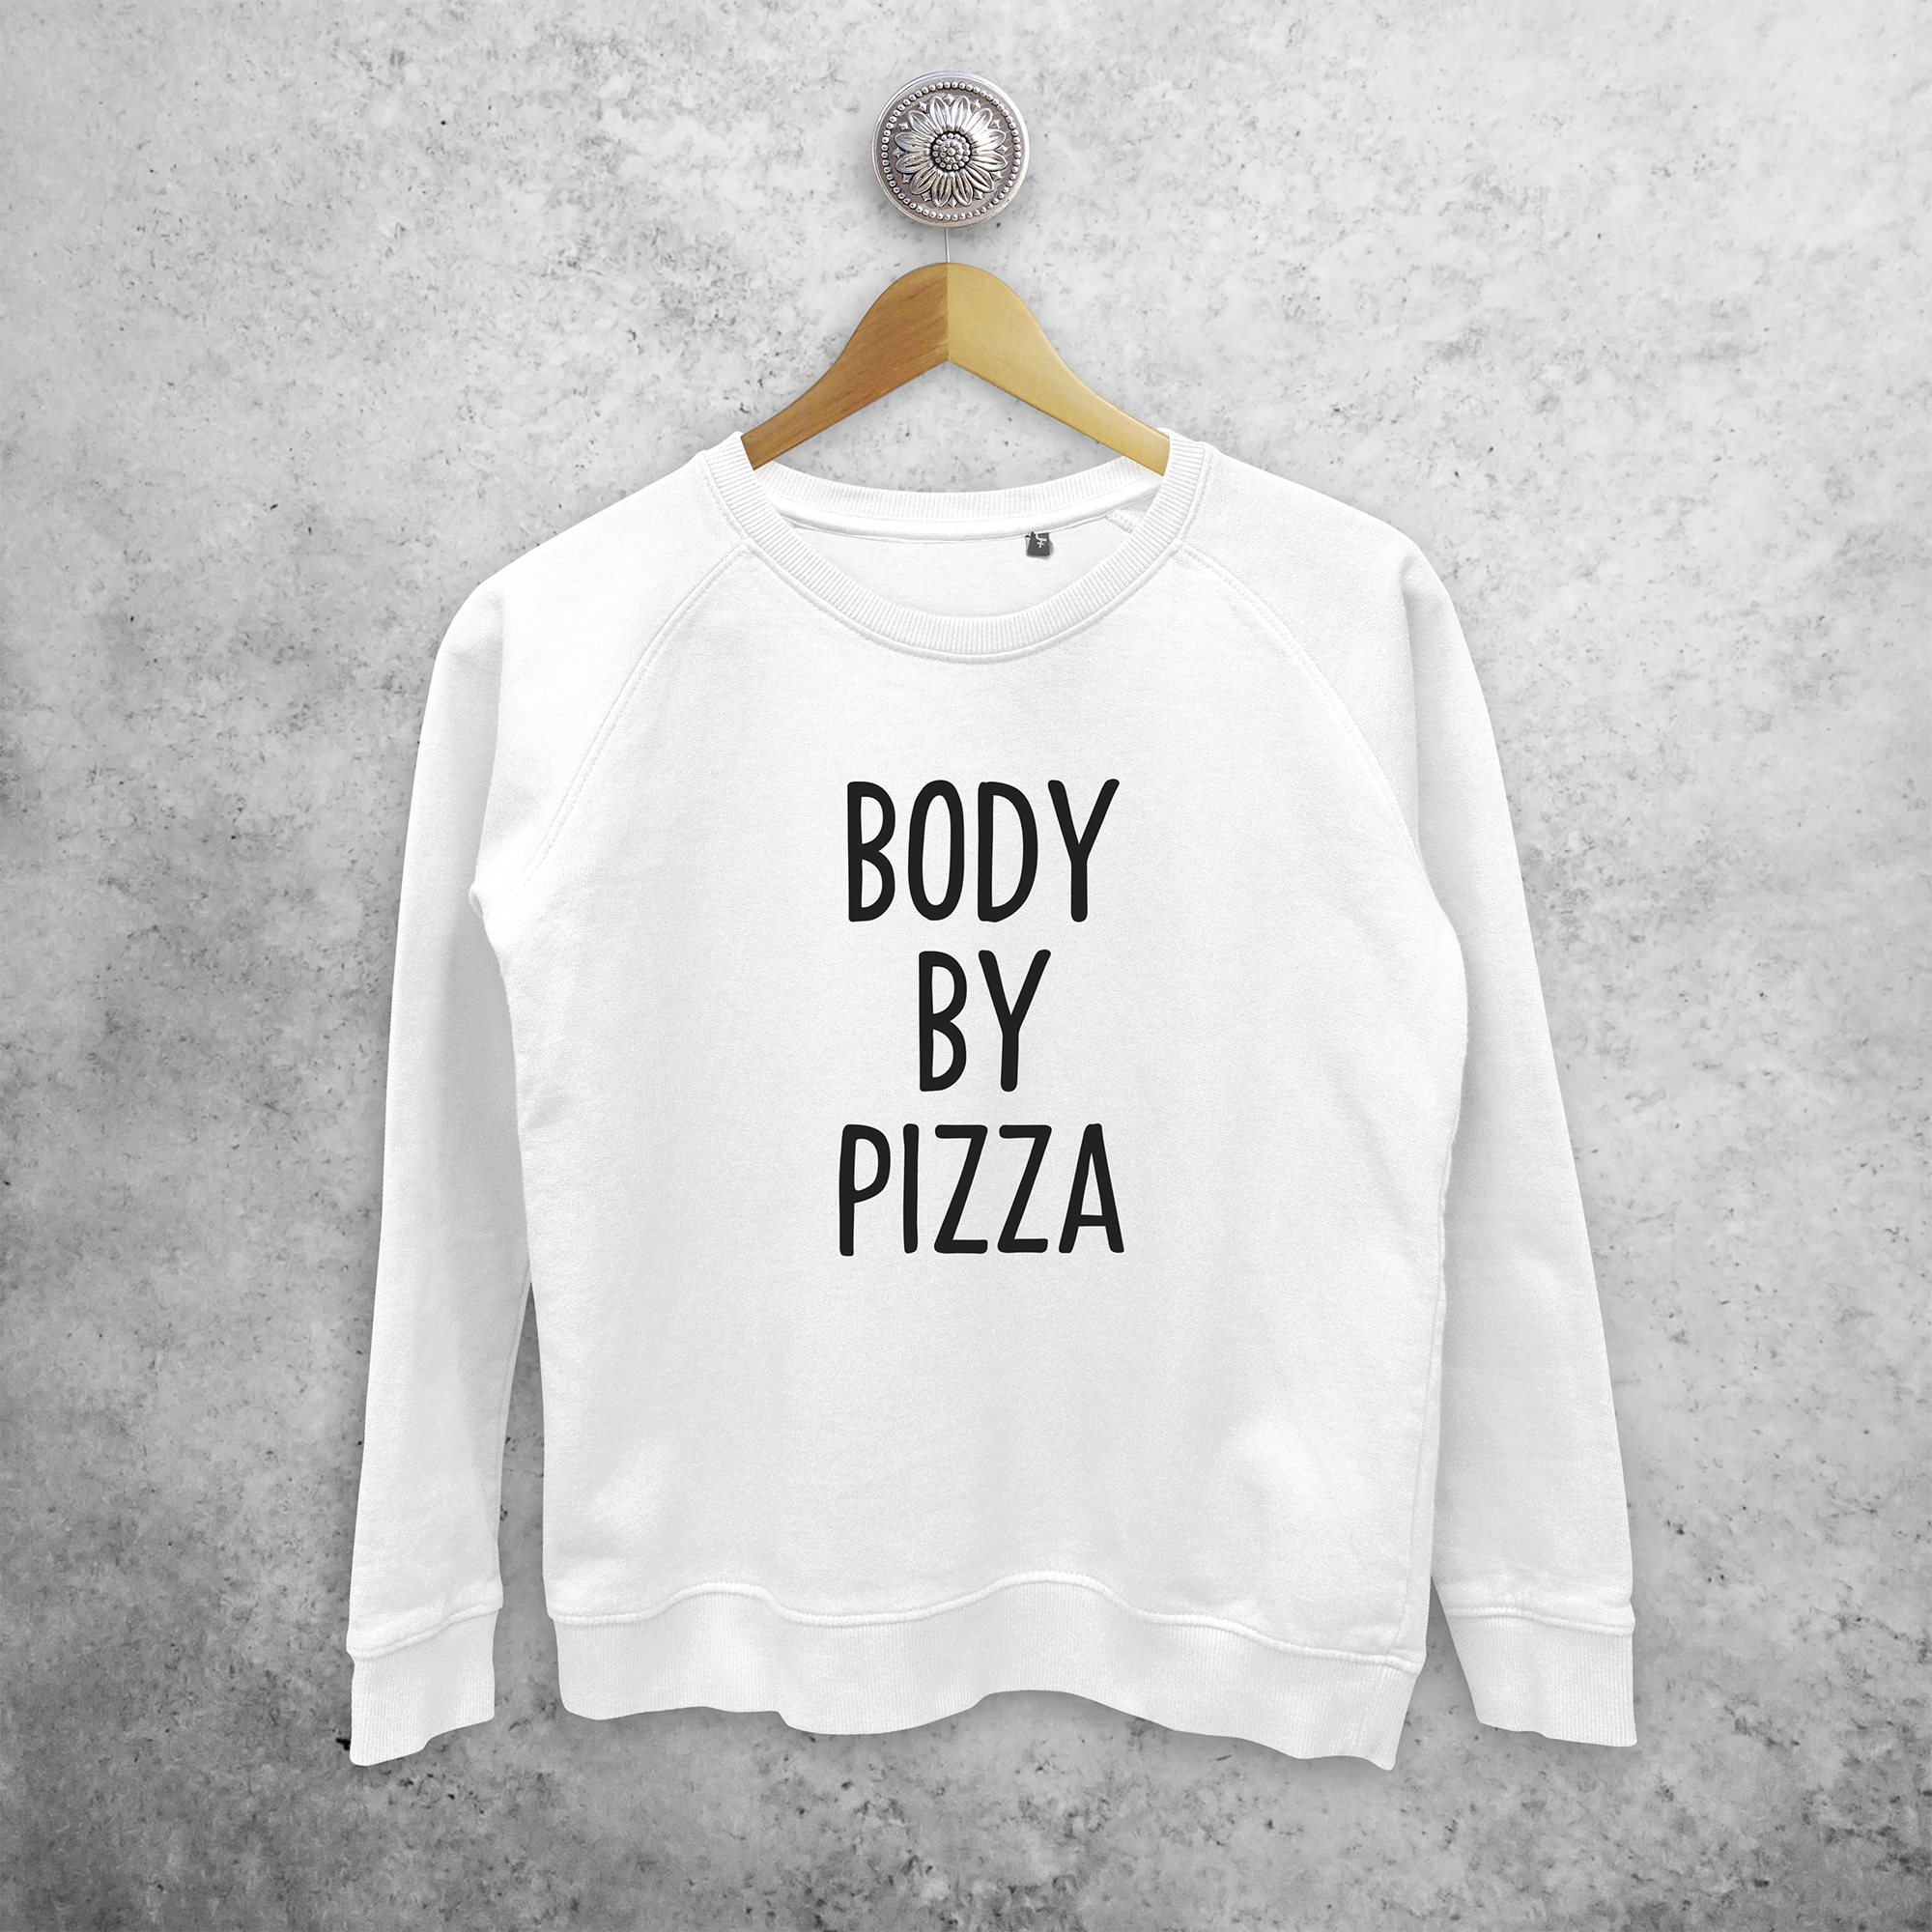 'Body by pizza' sweater